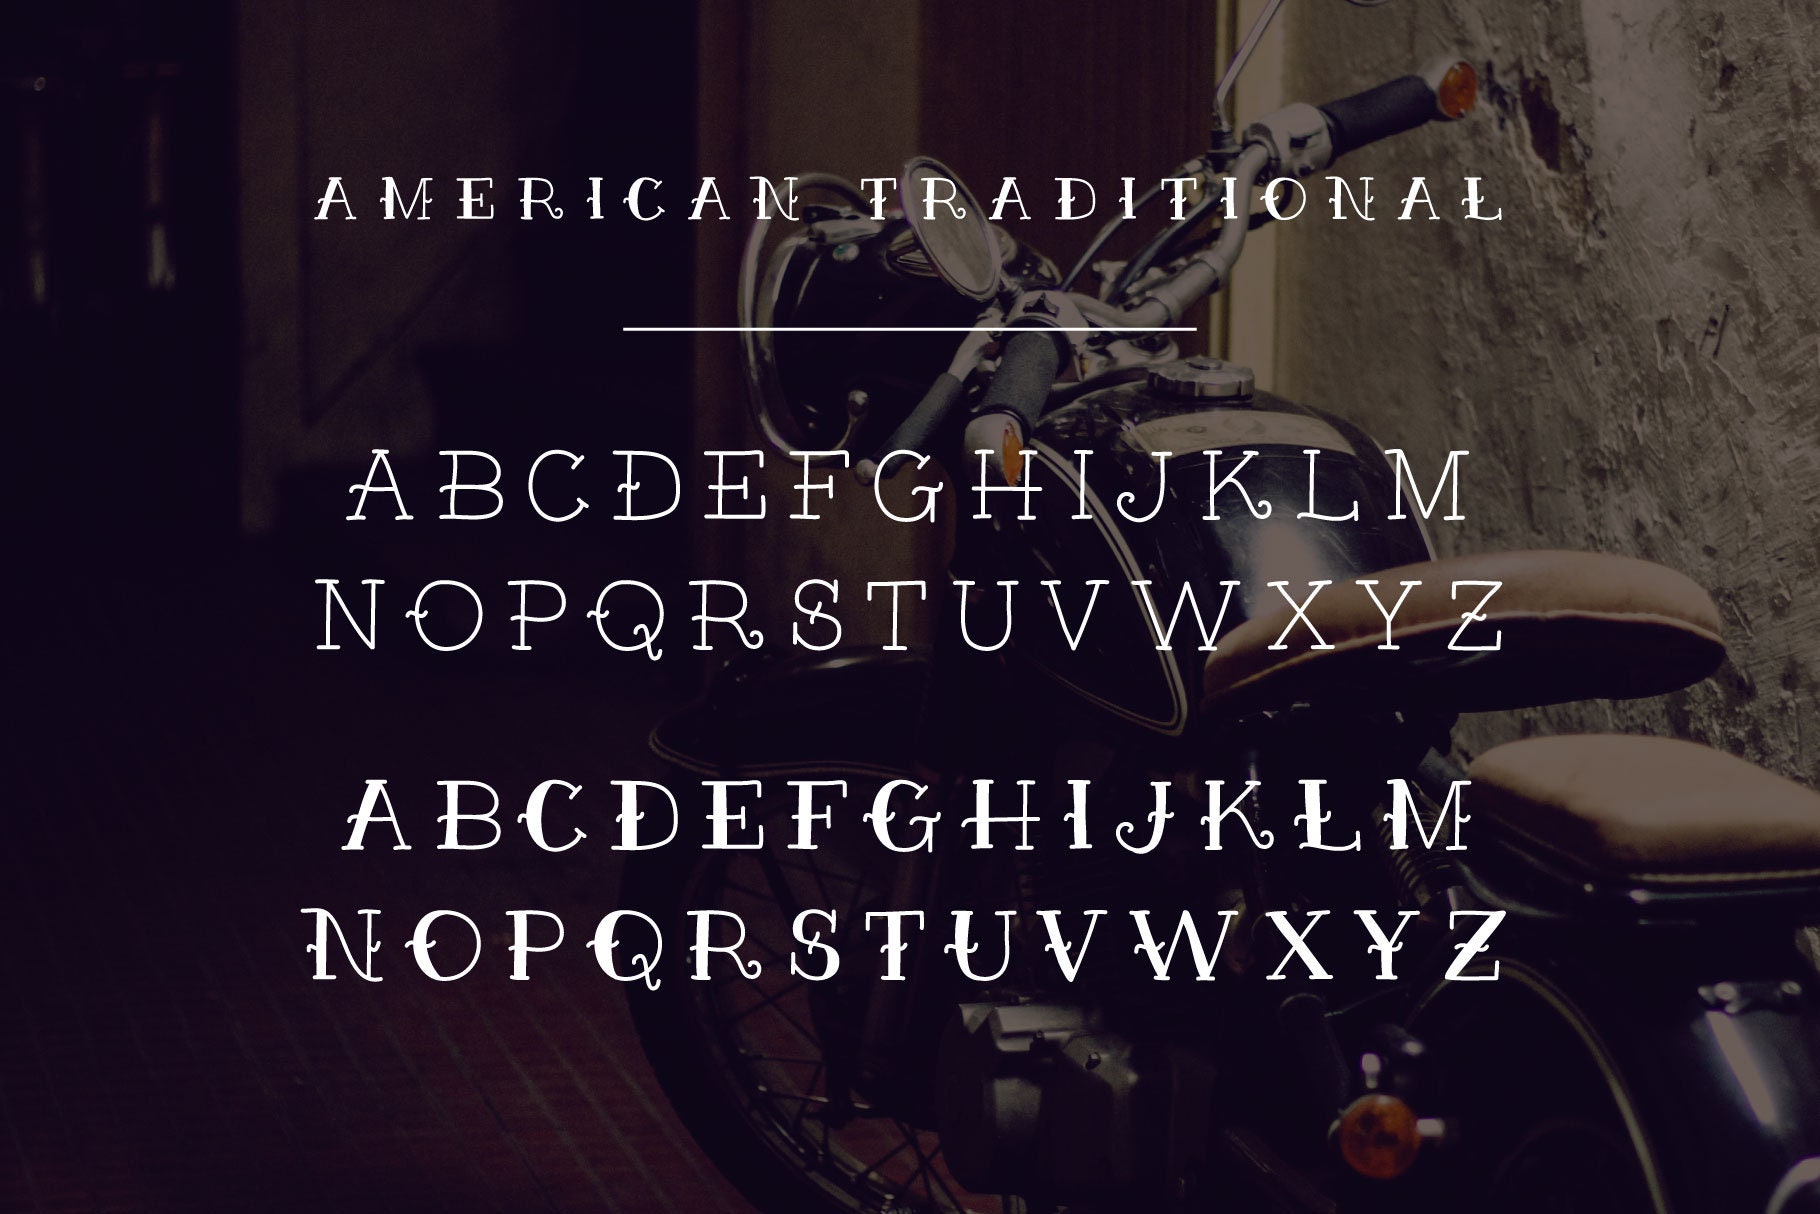 Buy American Traditional Tattoo Style Font Including Glyphs  Online in  India  Etsy